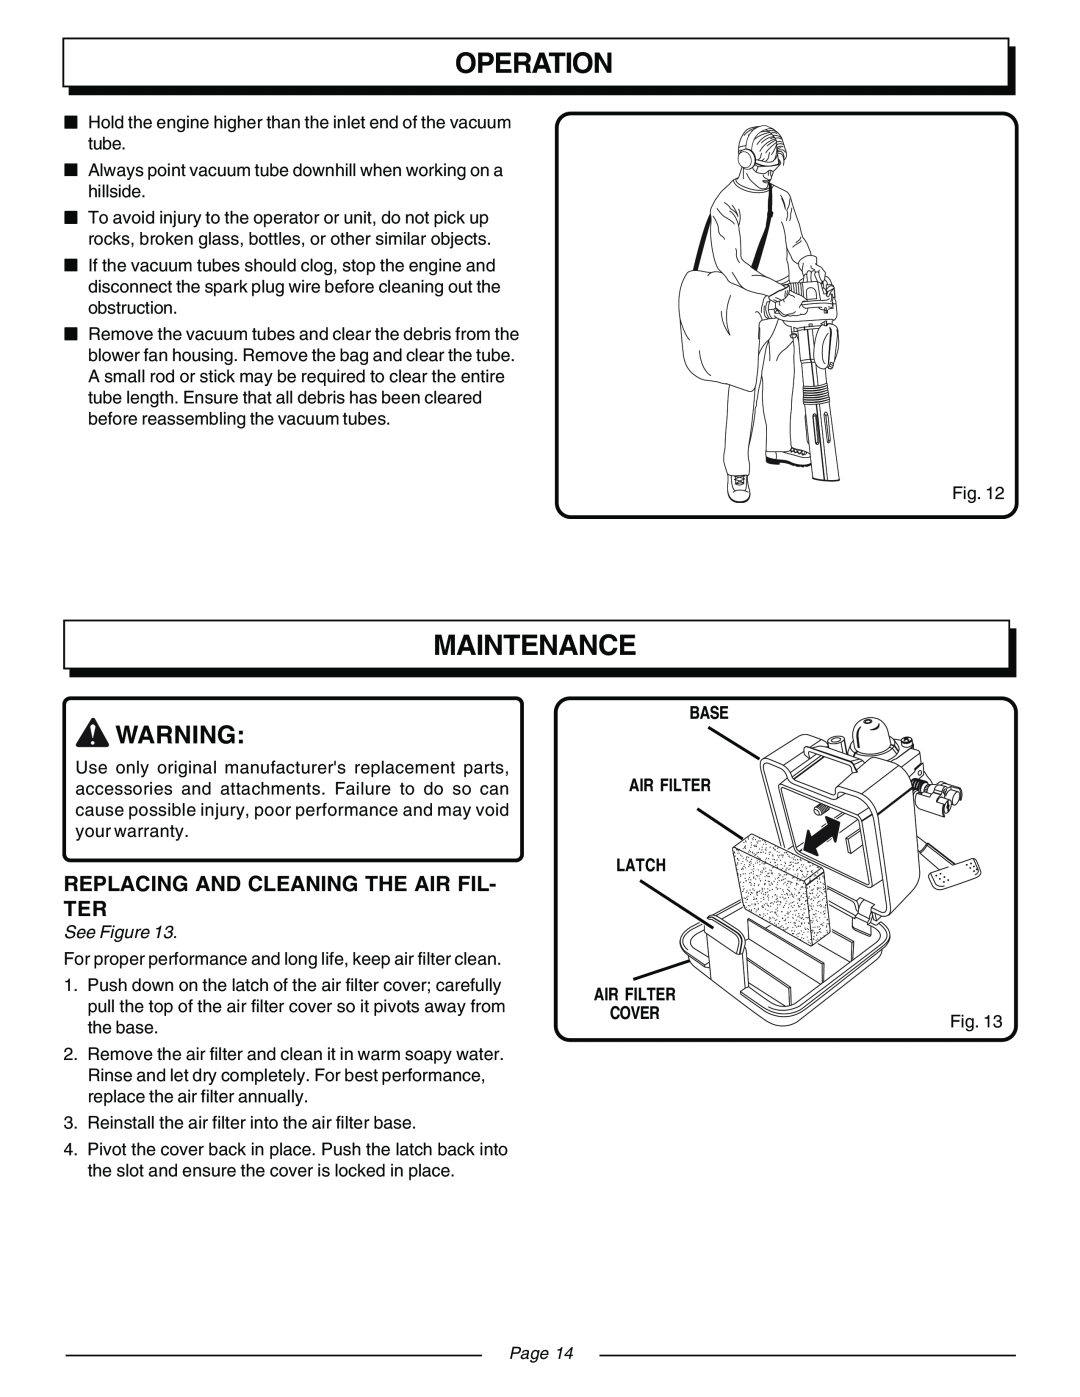 Homelite ZR08107 manual Maintenance, Operation, Base Air Filter Latch, See Figure, Page 